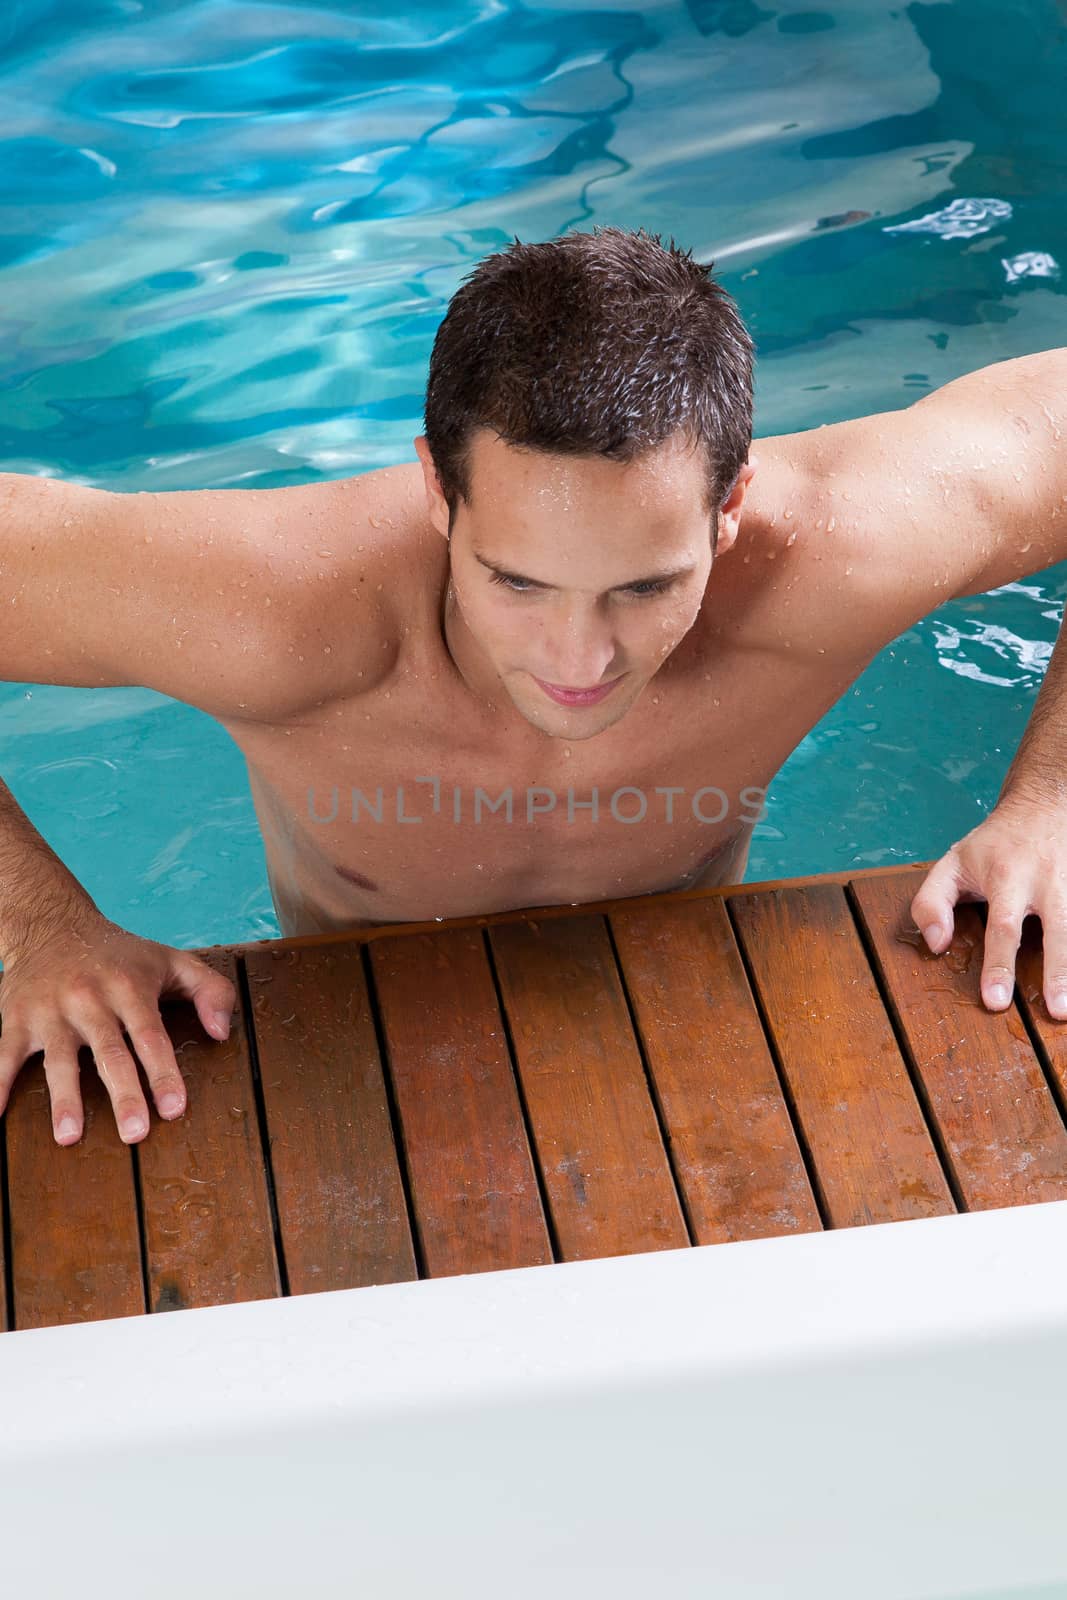 Guy coming out of the pool